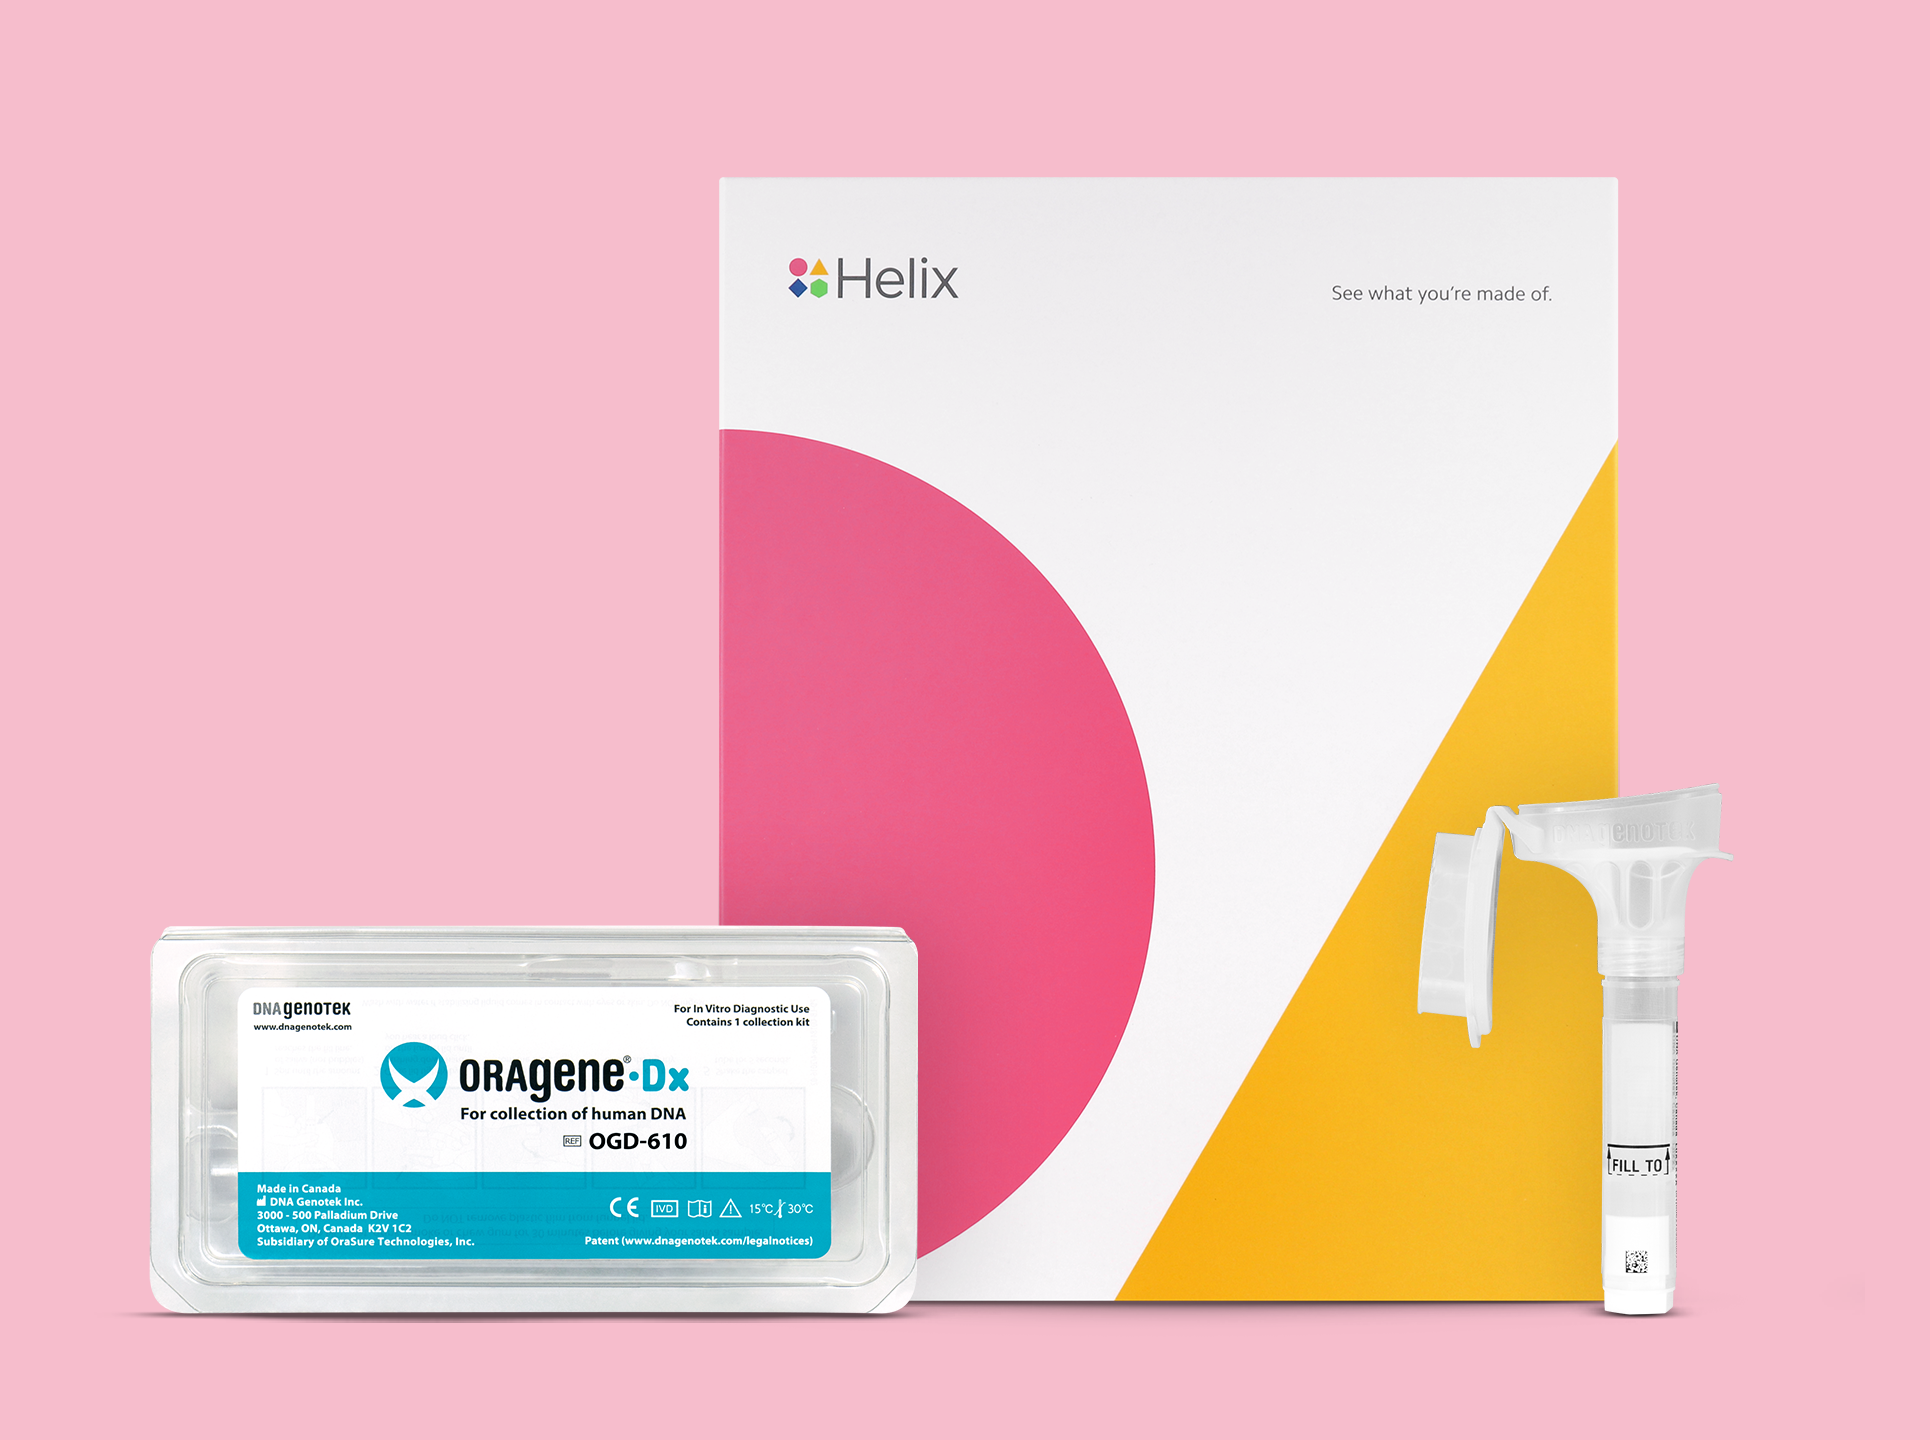 Get a Helix DNA kit so you can show off what makes you unique. Kit is only required if you haven’t already been sequenced by Helix.